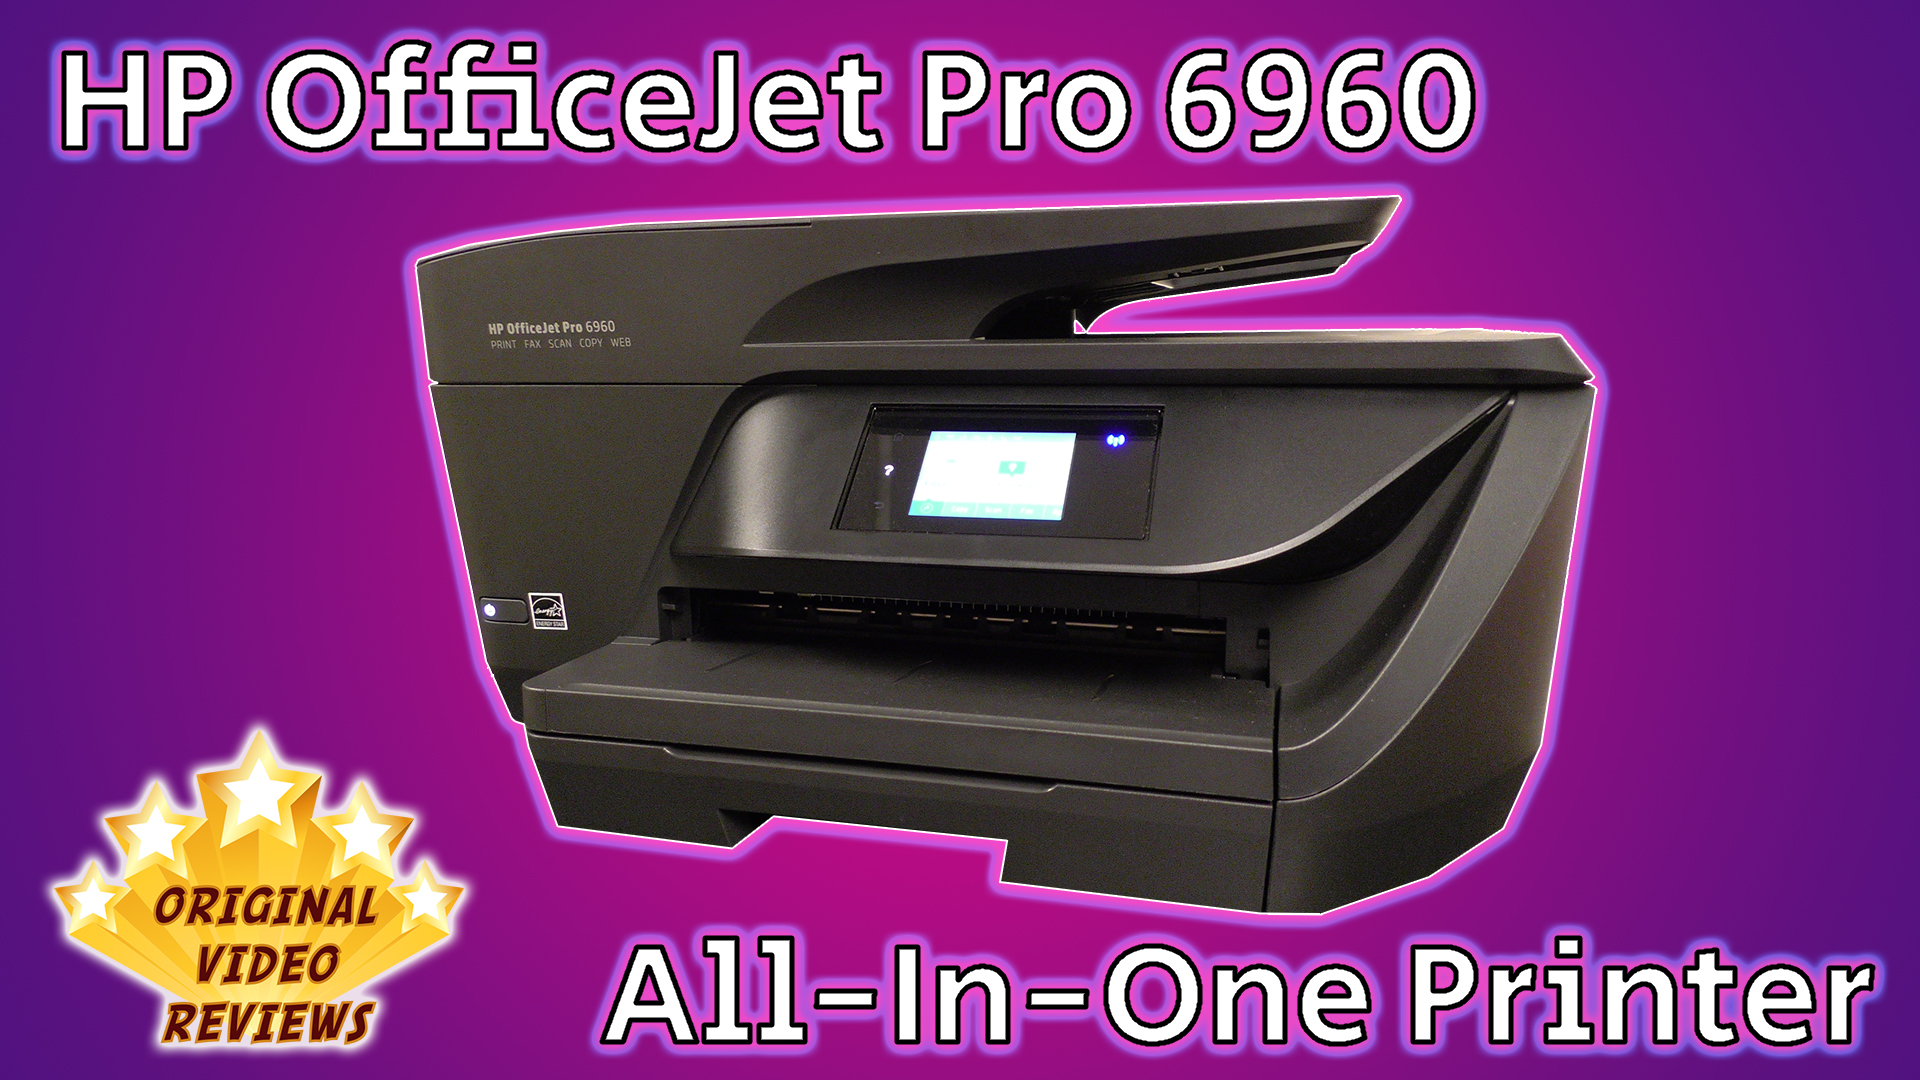 HP OfficeJet Pro 6960 All-in-One Printer (Review) - Original Video Reviews